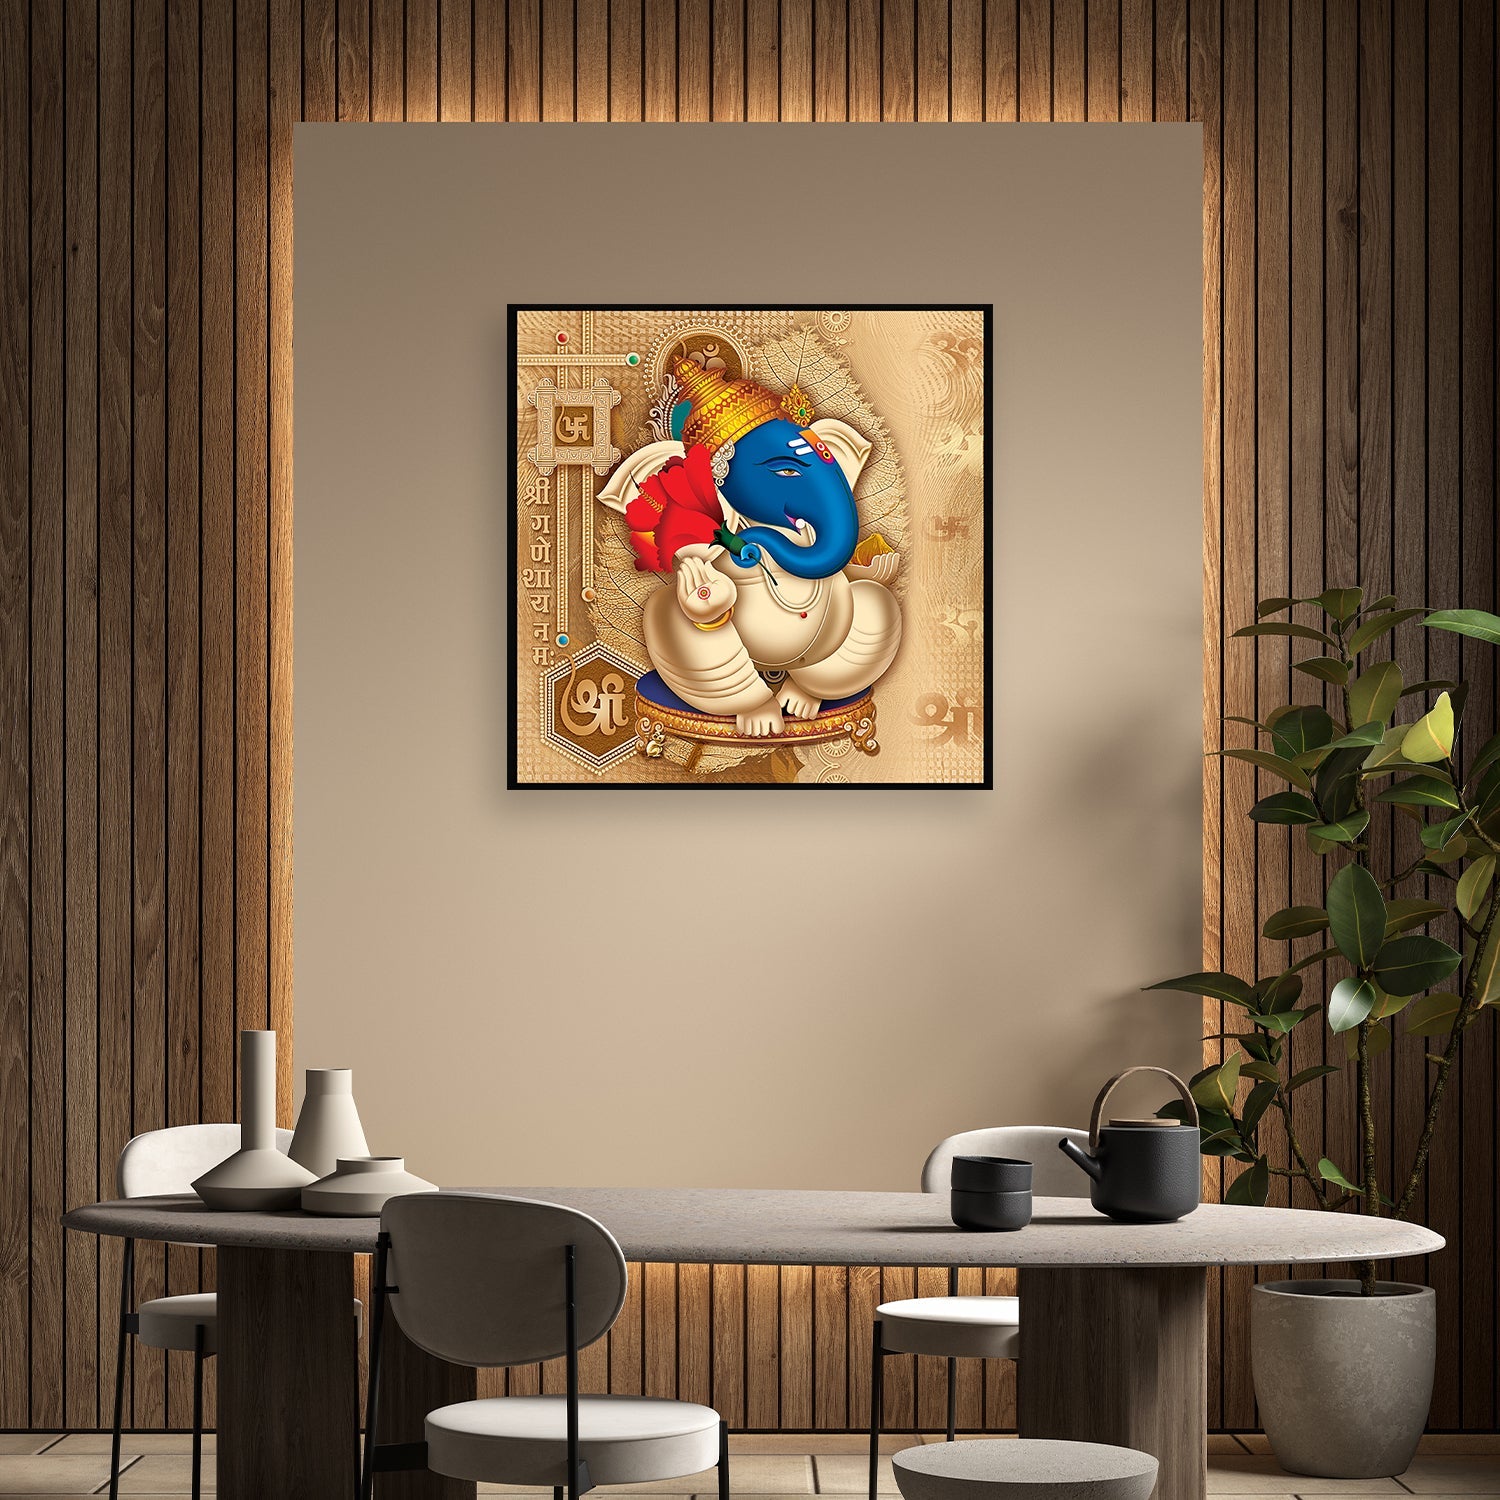 Ganesha brings wisdom and vibrancy to your home.